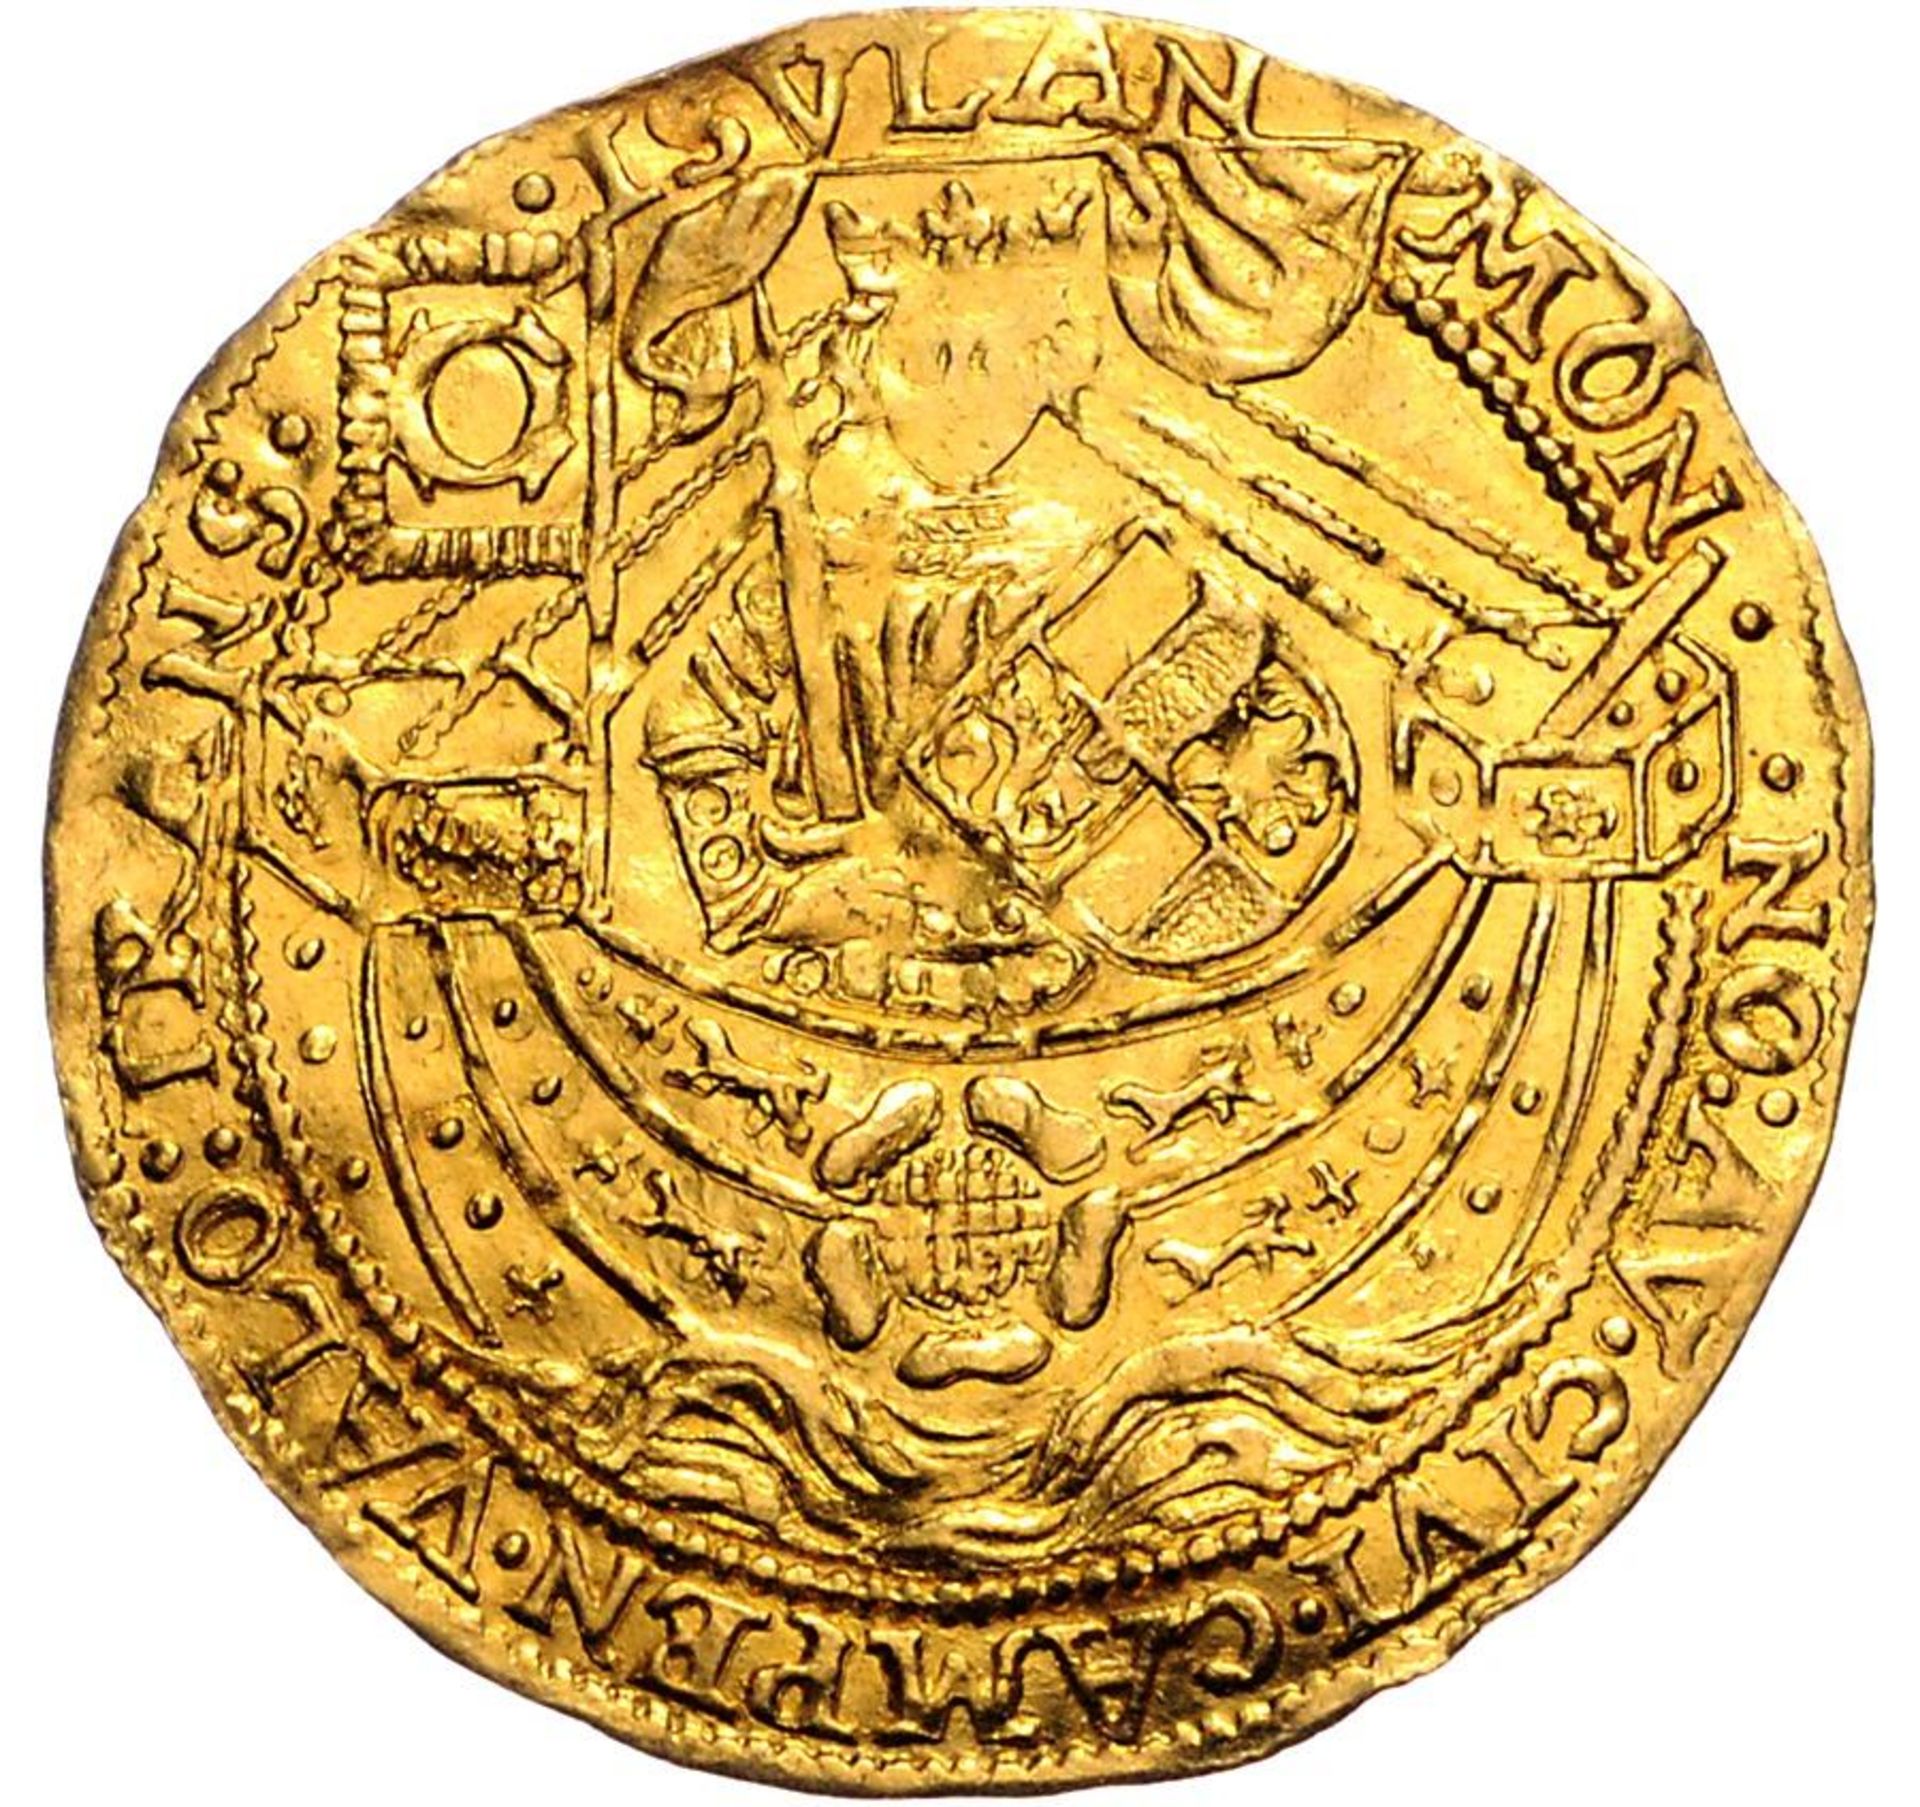 Rose Noble - 1600's - Gold coin - Image 2 of 3